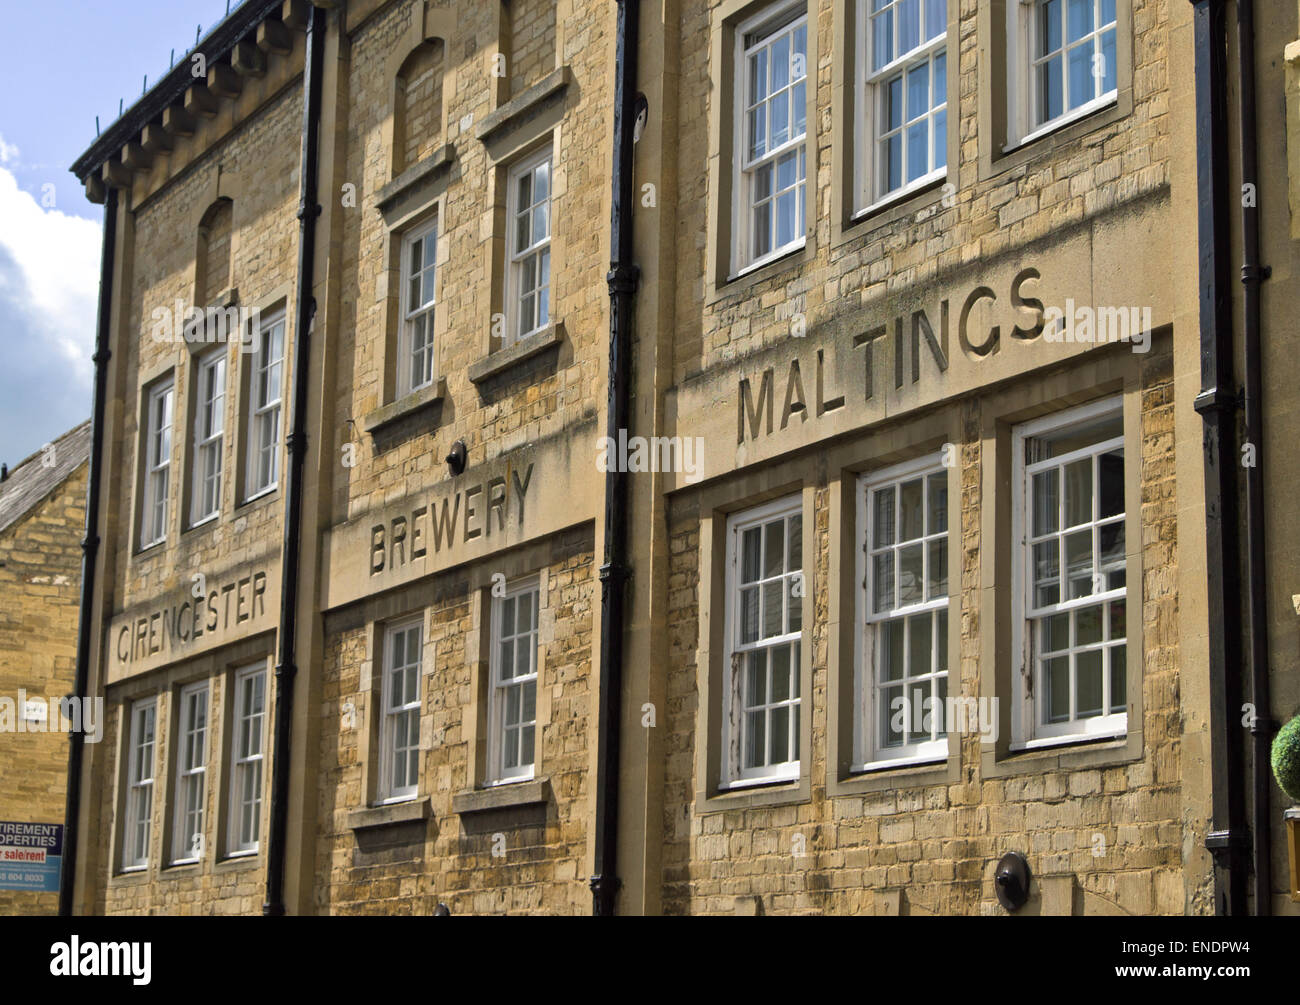 Cirencester A Cotswold market town in Gloucestershire England UK Gloucester Brewery Maltings Stock Photo